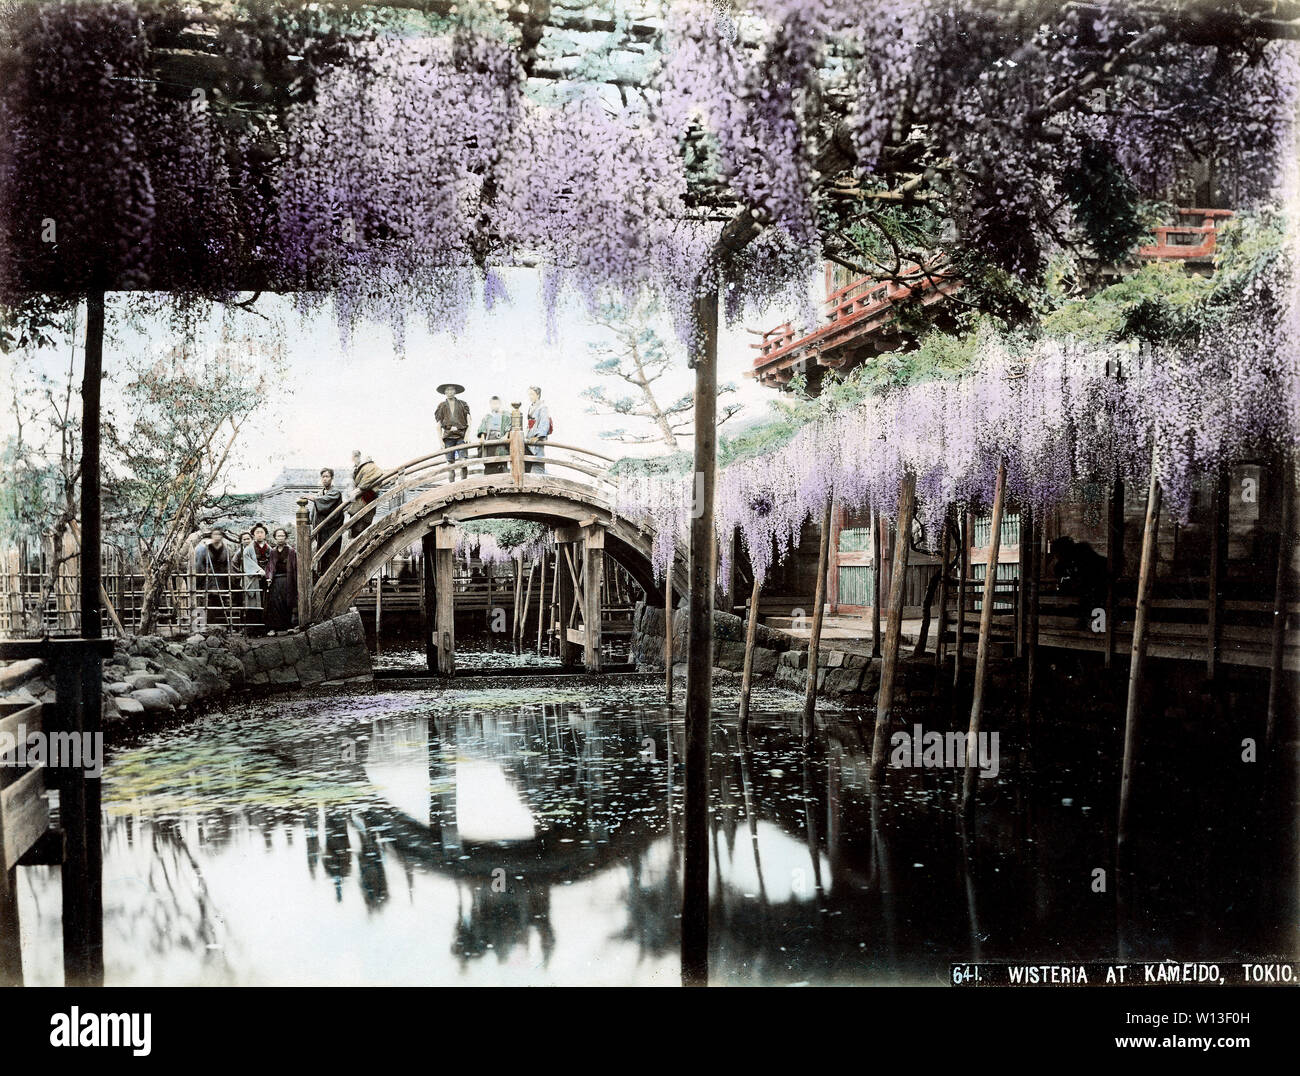 [ 1890s Japan - Wisteria at Kameido Tenjinja, Tokyo ] —   Arched bridge at Kameido Tenjinja Shrine in Tokyo. The Shinto shrine, famous for its bridge and Wisteria, is dedicated to poet scholar and statesman Sugawara no Michizane (845-903). It therefore attracts many students who pray here before their examinations.  19th century vintage albumen photograph. Stock Photo